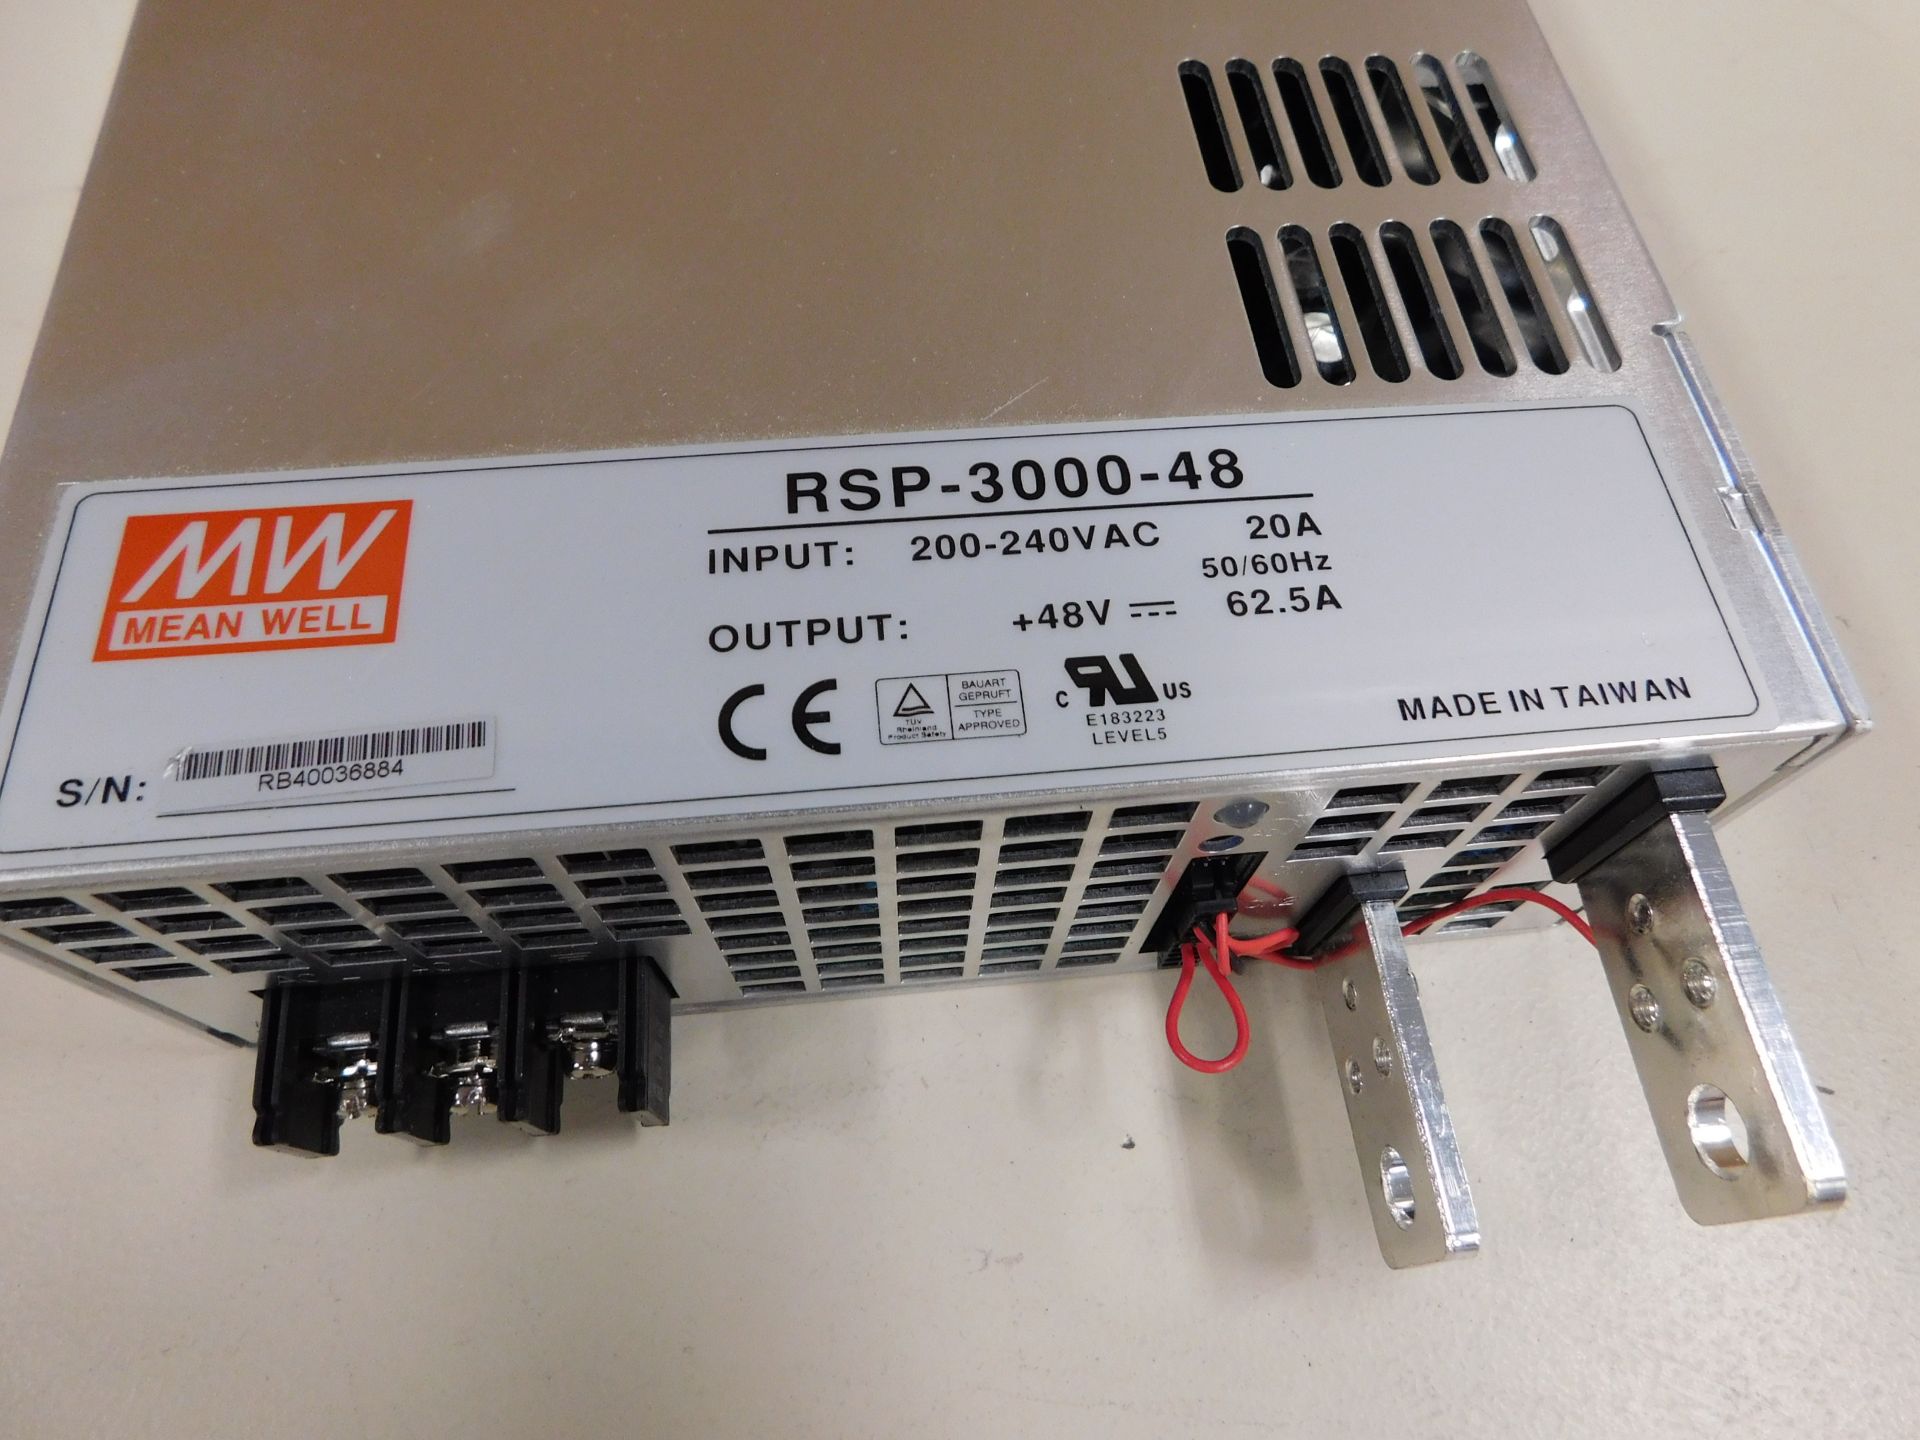 RSP-3000-48 POWER SUPPLY - Image 3 of 3